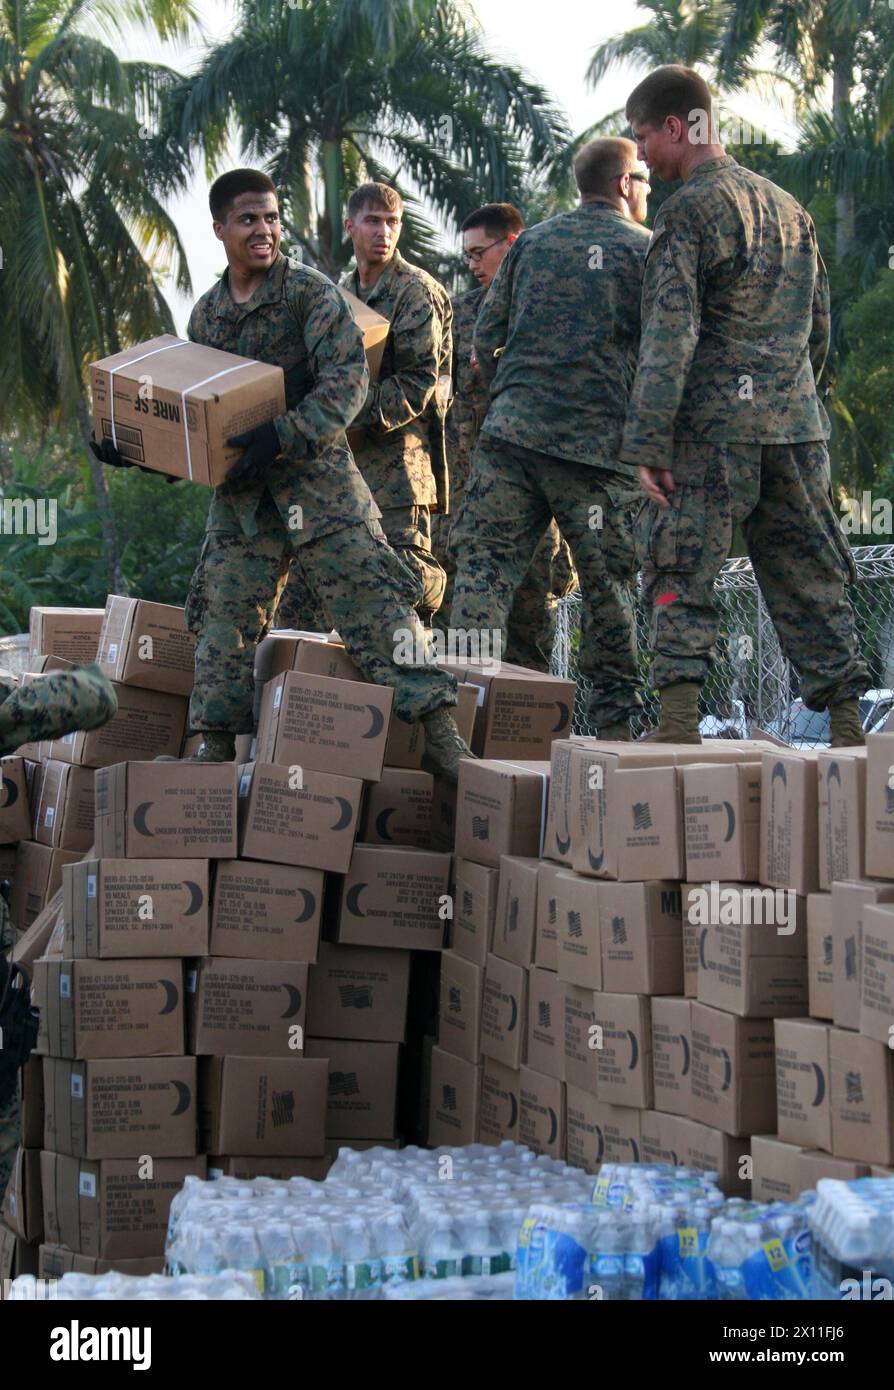 Marines from Combat Logistics Battalion 22, 22nd Marine Expeditionary Unit, load a 7-ton truck with relief supplies for distribution in Petit Goave, Haiti Jan. 24, 2010. In response to a devastating earthquake, which struck the country of Haiti, Marines and sailors of the 22nd MEU began to deliver relief supplies and providing medical aid in support of Operation Unified Response, Jan. 19. Stock Photo